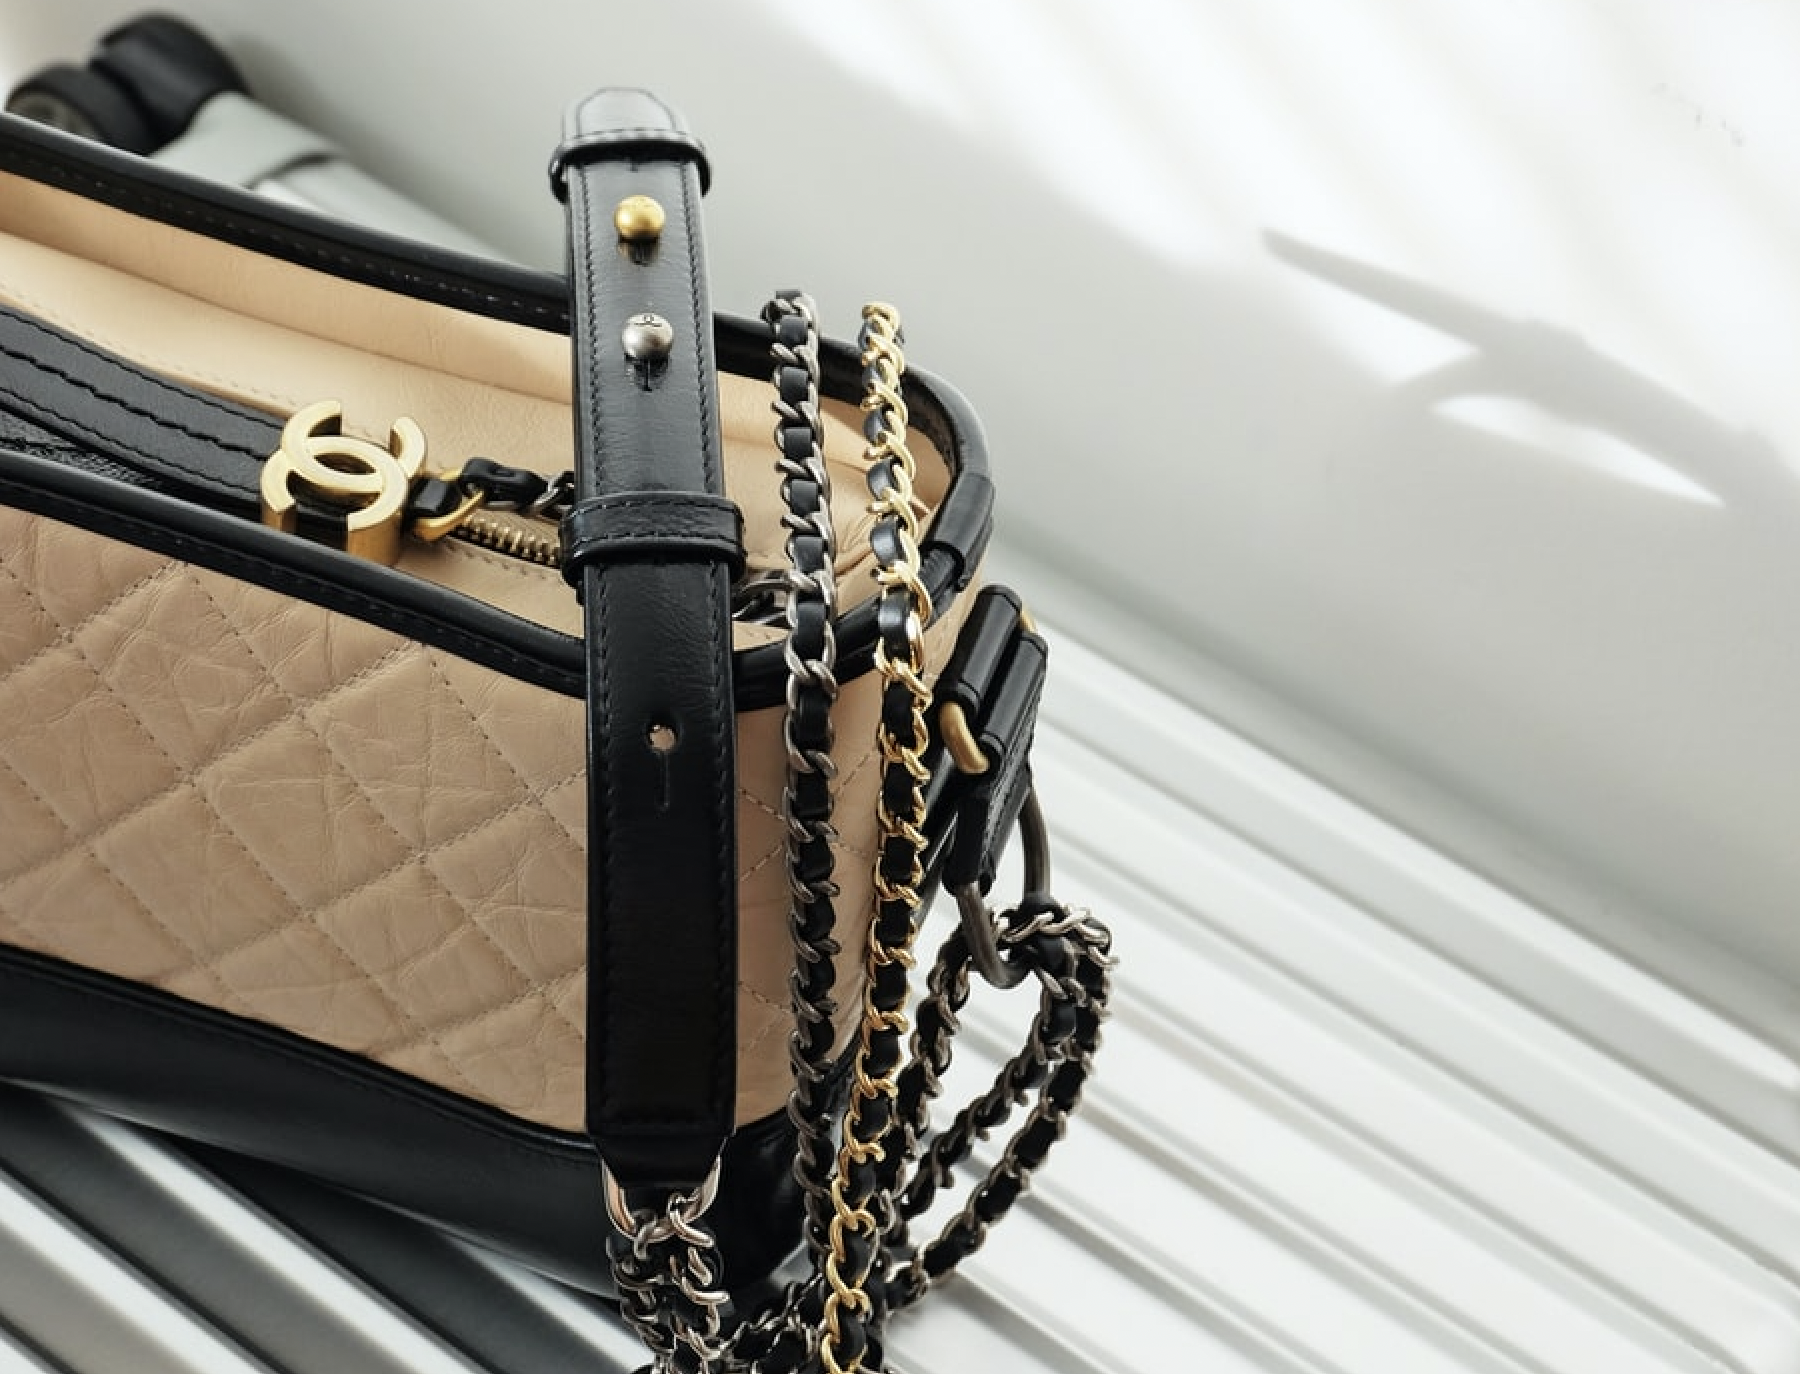 Resale Site Says Chanel Lacks Basis in Case Over Use of the Chanel Name,  Logo in Connection with Chanel Goods - The Fashion Law